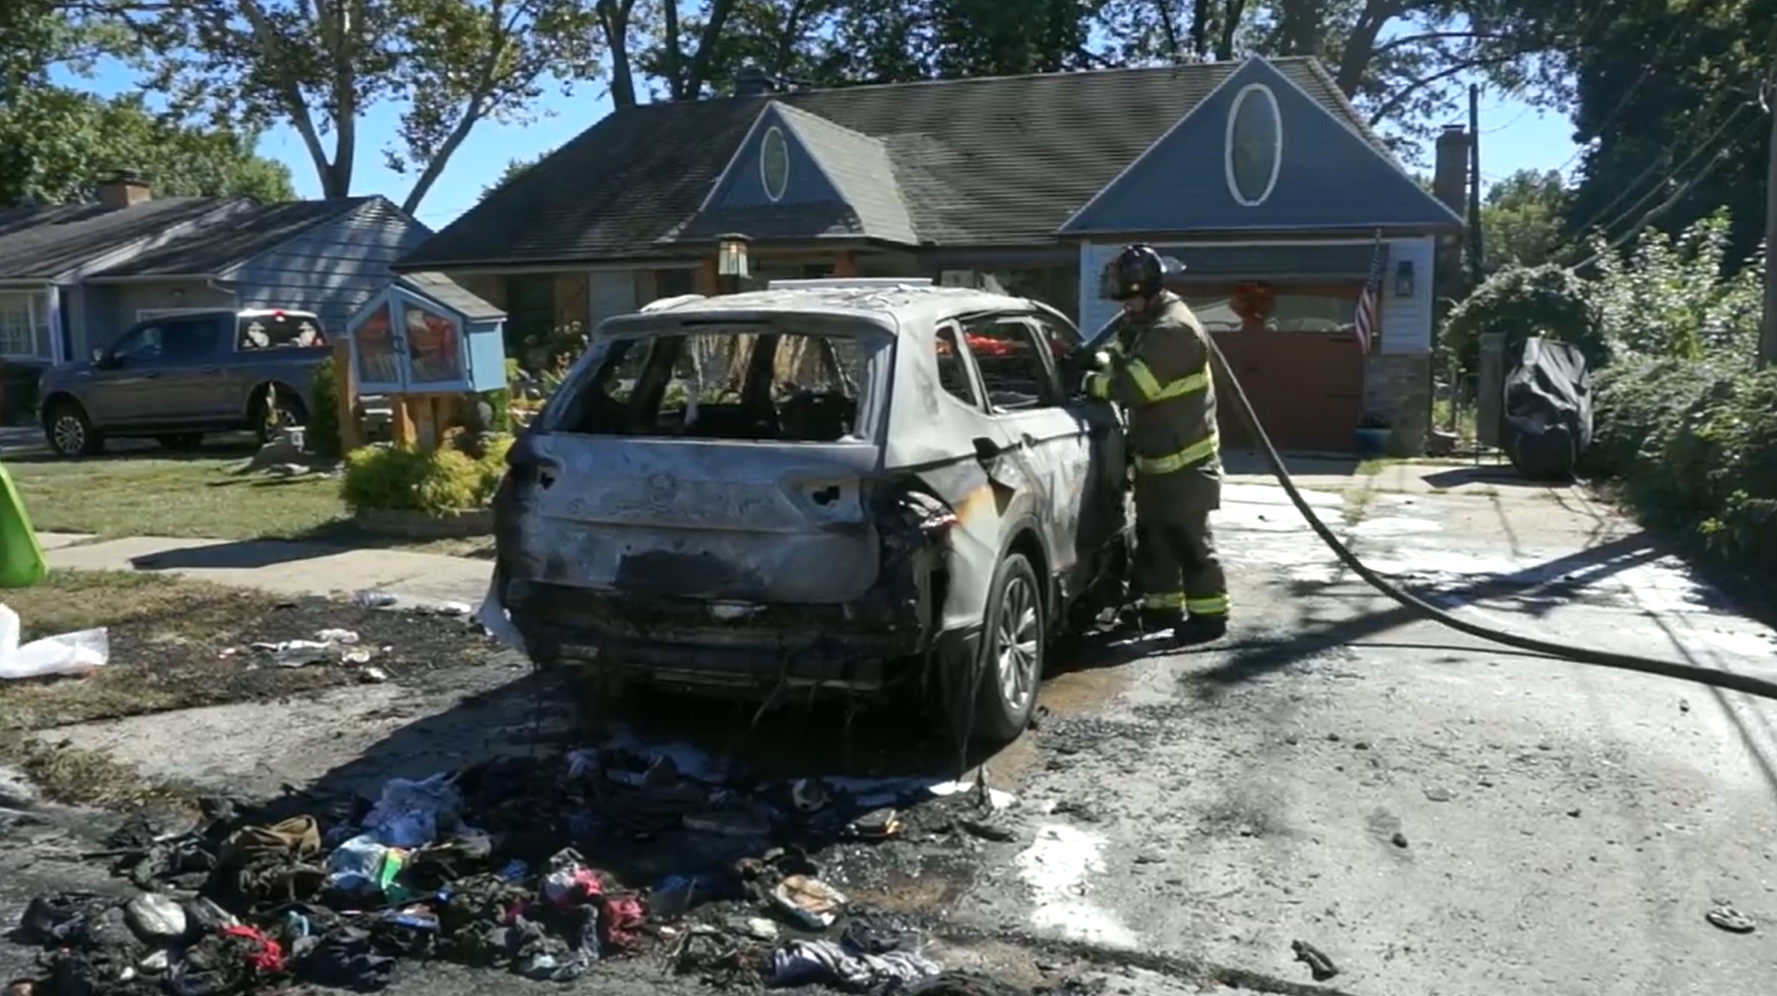 Child hospitalized after car caches fire at 'tiny' food pantry in Overland Park